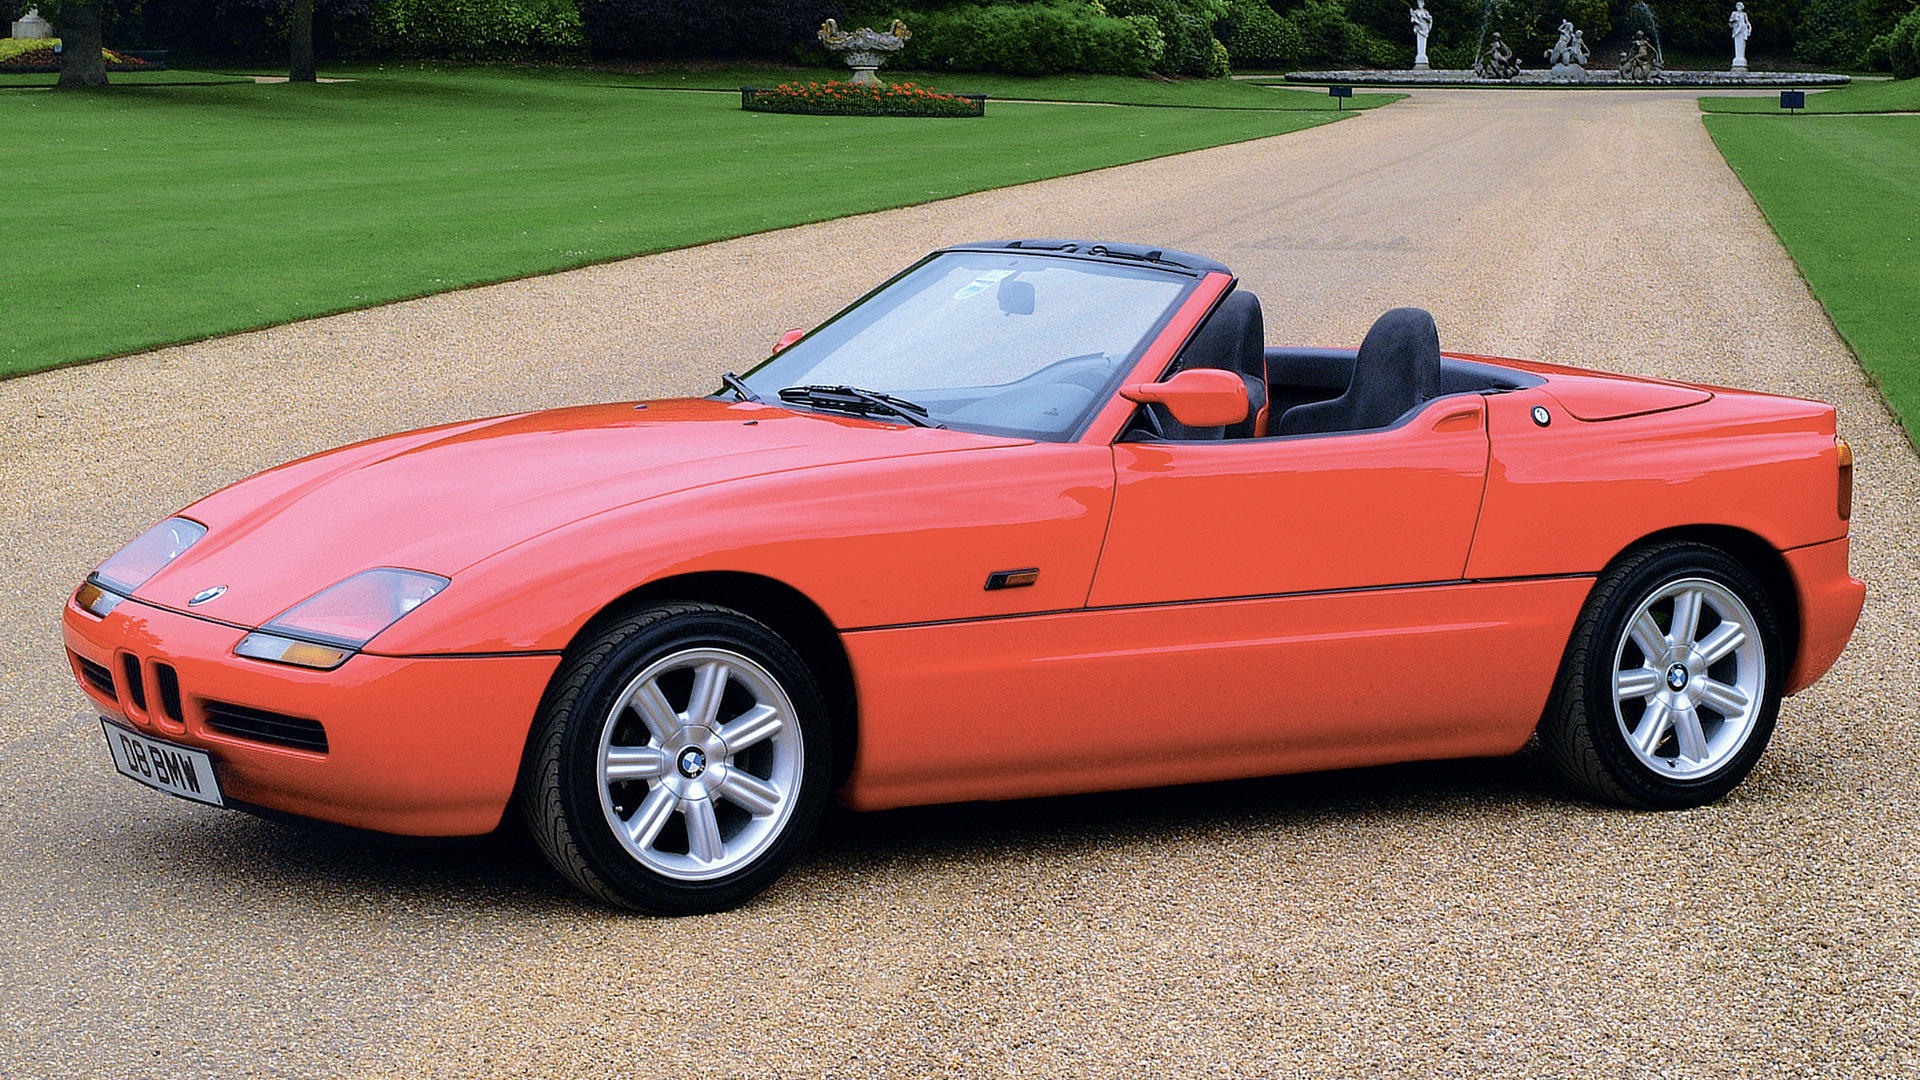 1989 Bmw Z1 Wallpapers And Hd Images Car Pixel